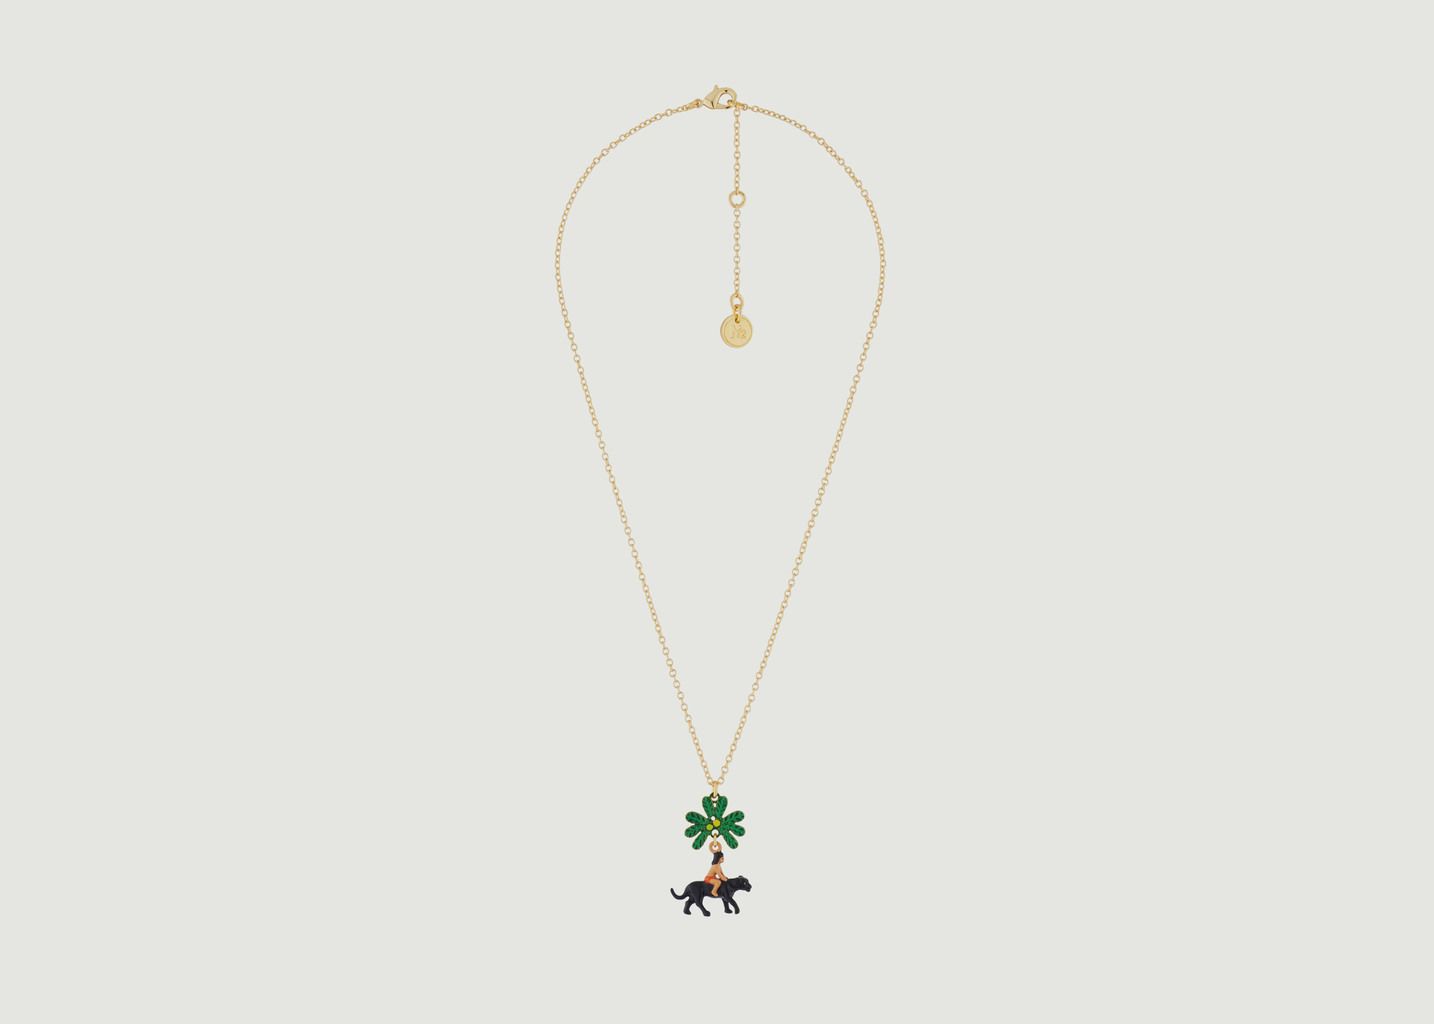 Jungle Book Necklace - N2